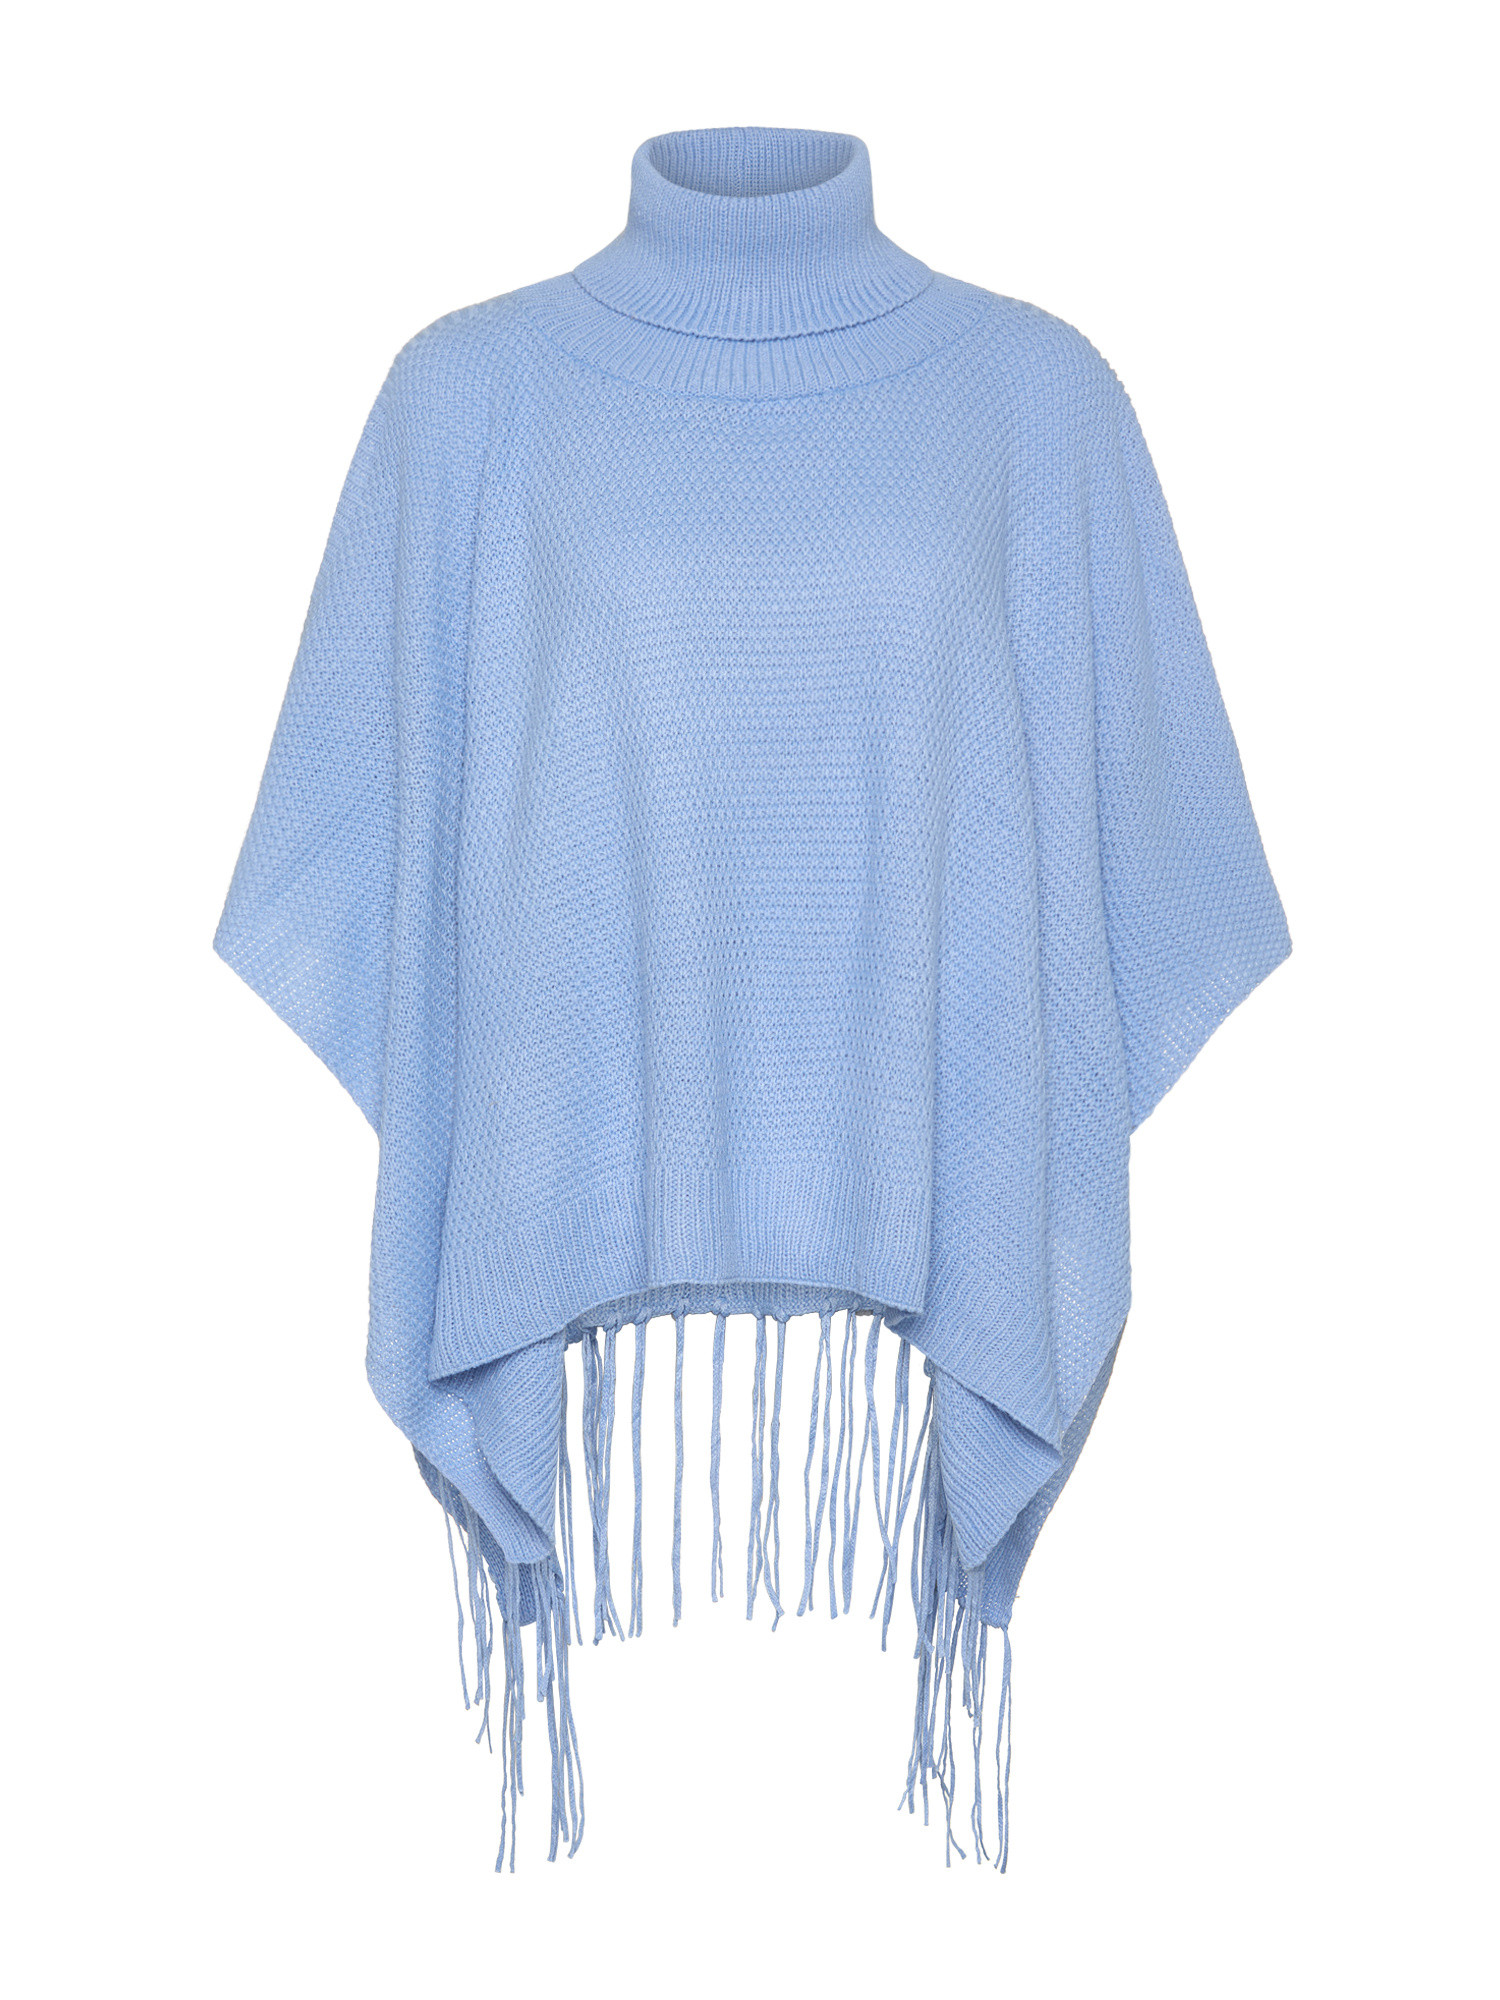 Koan - Knitted poncho, Light Blue, large image number 0